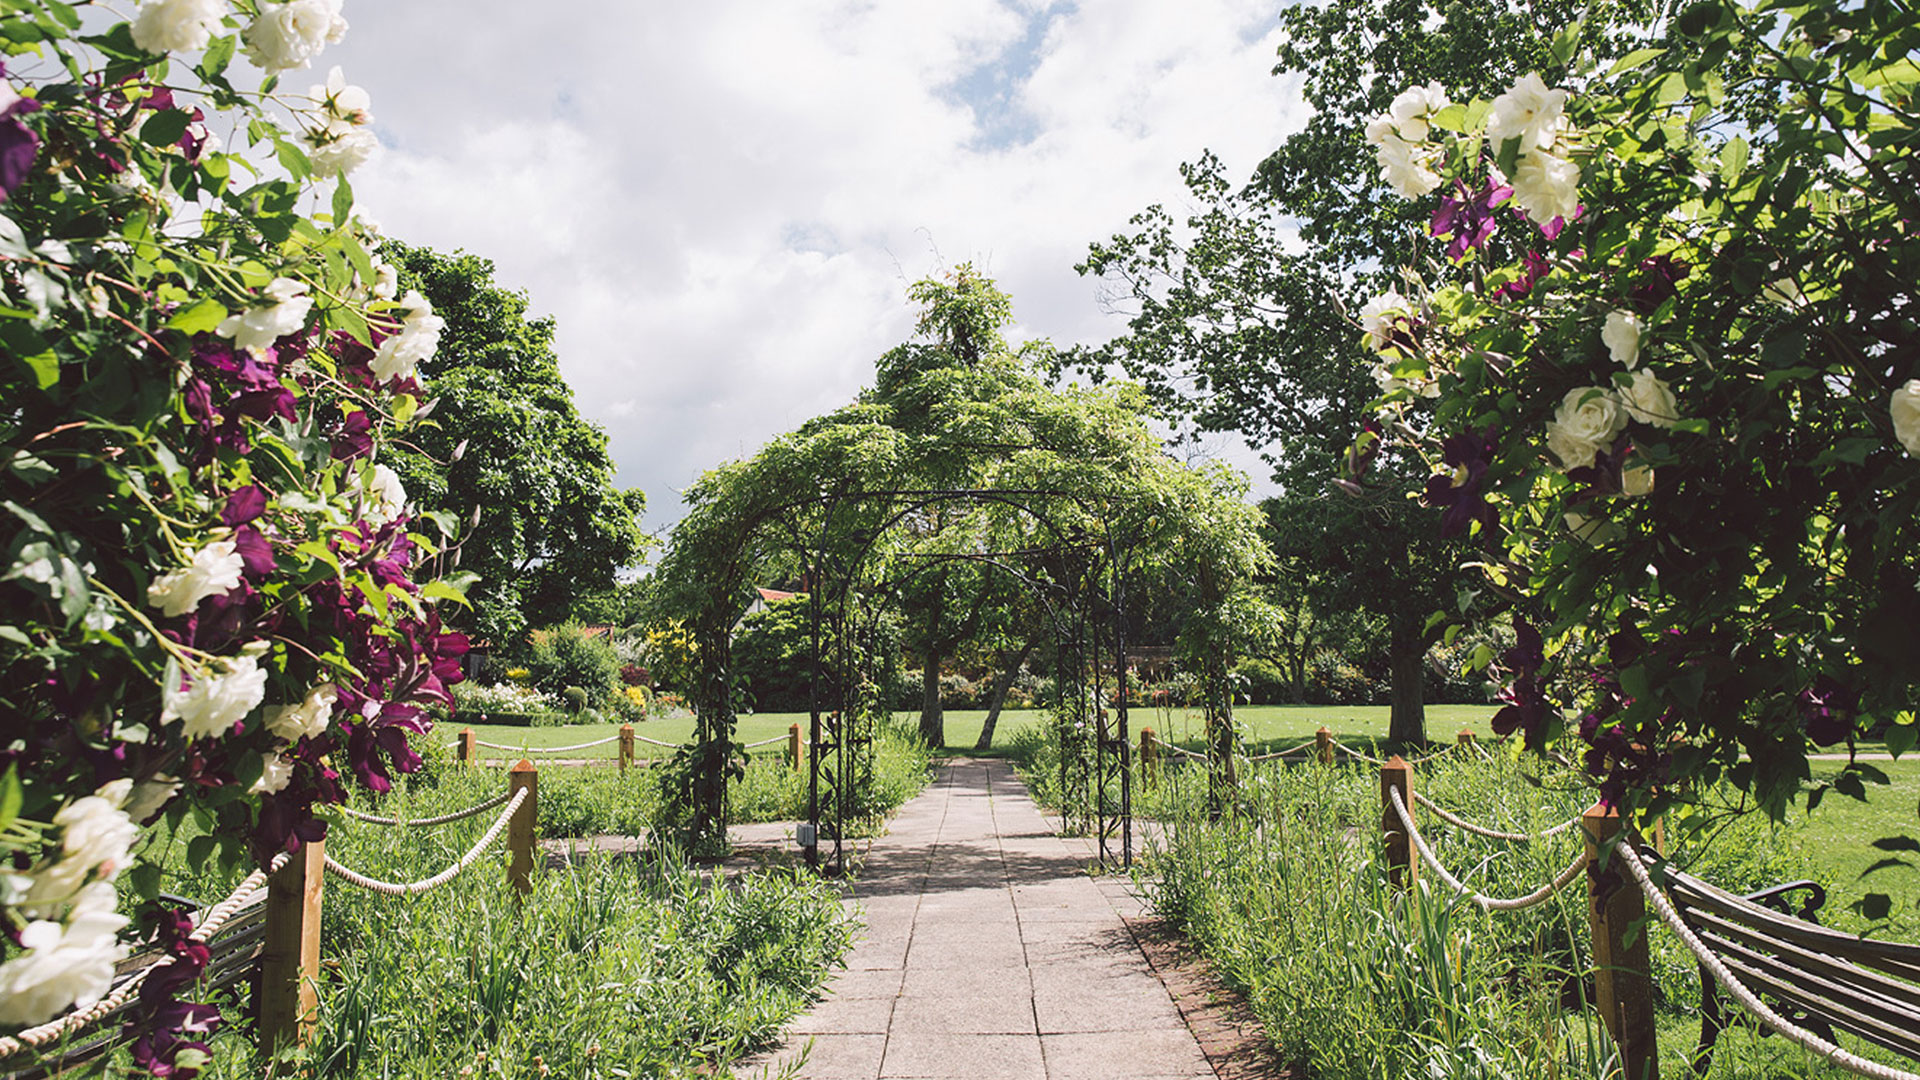 The Walled Garden is full of blooms and home to many seating areas - wedding venues in Essex